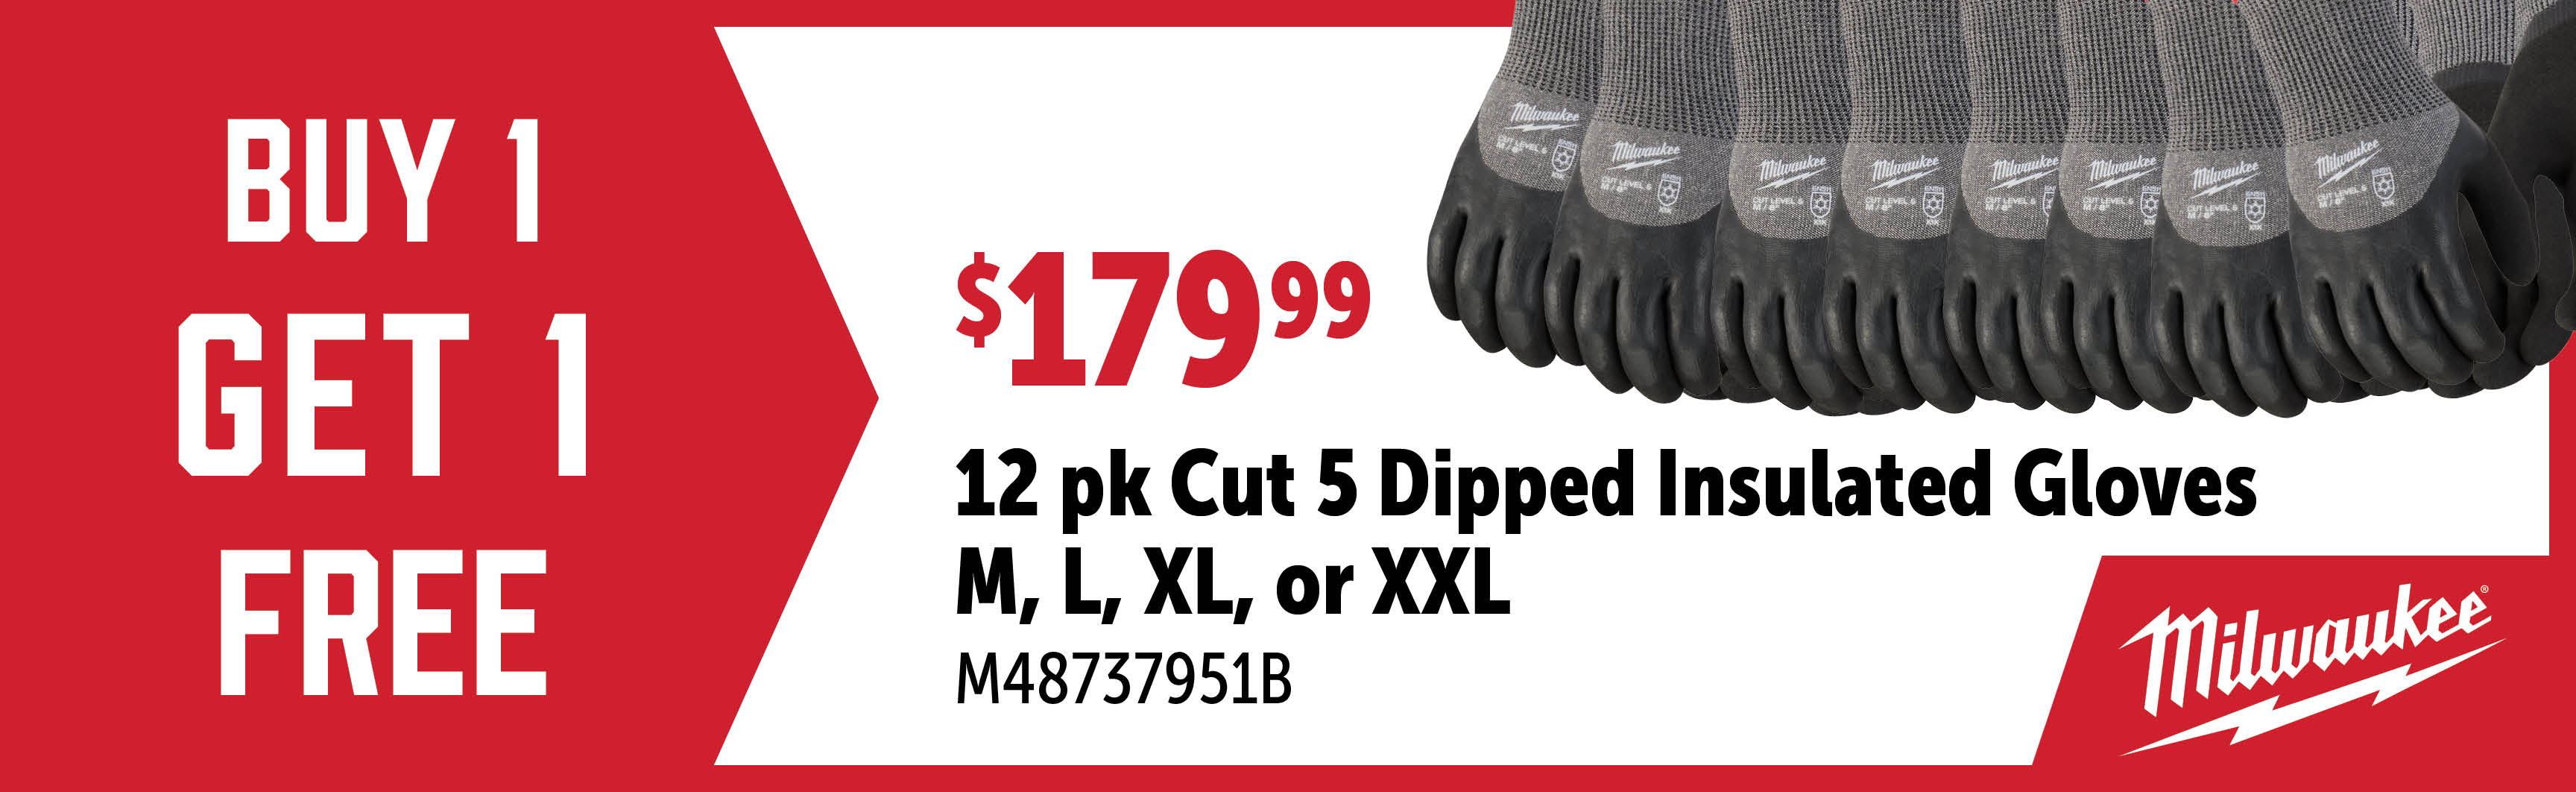 Milwaukee Aug-Oct: Buy 1 Get 1 FREE on Qualifying Cut 5 Winter Gloves